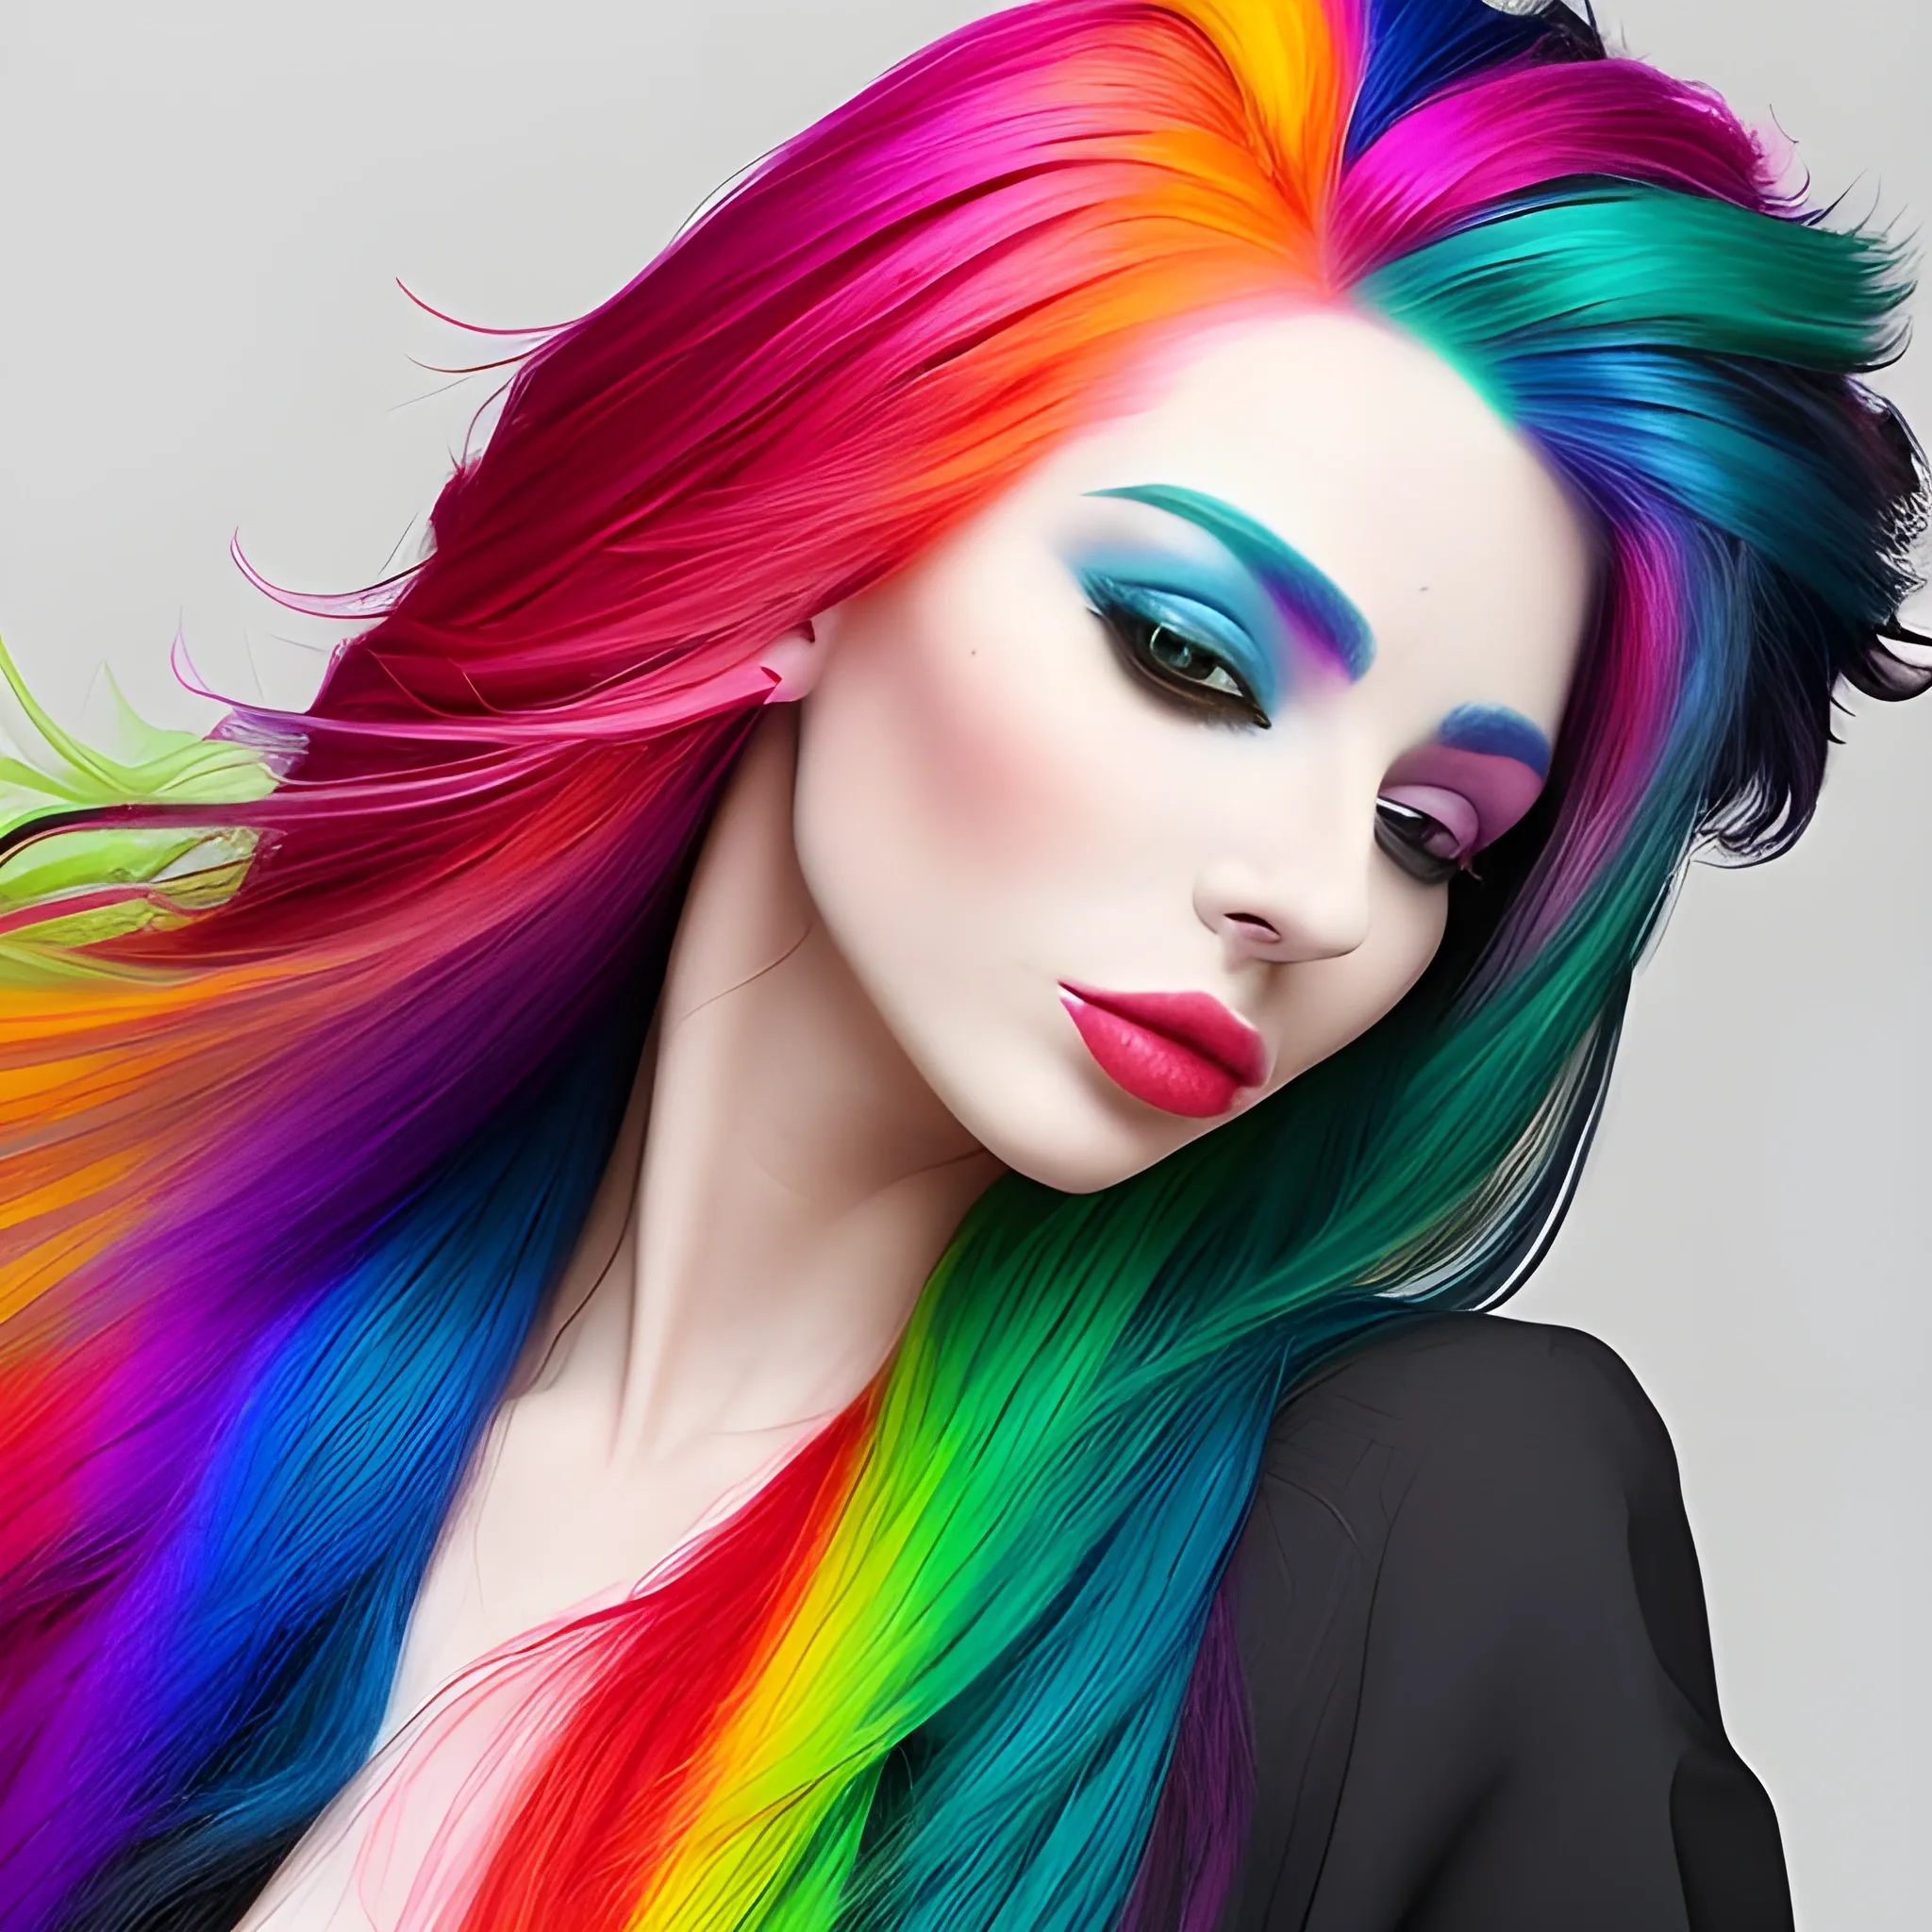 the woman is wearing multicolored hair, vibrant color scheme - Arthub.ai